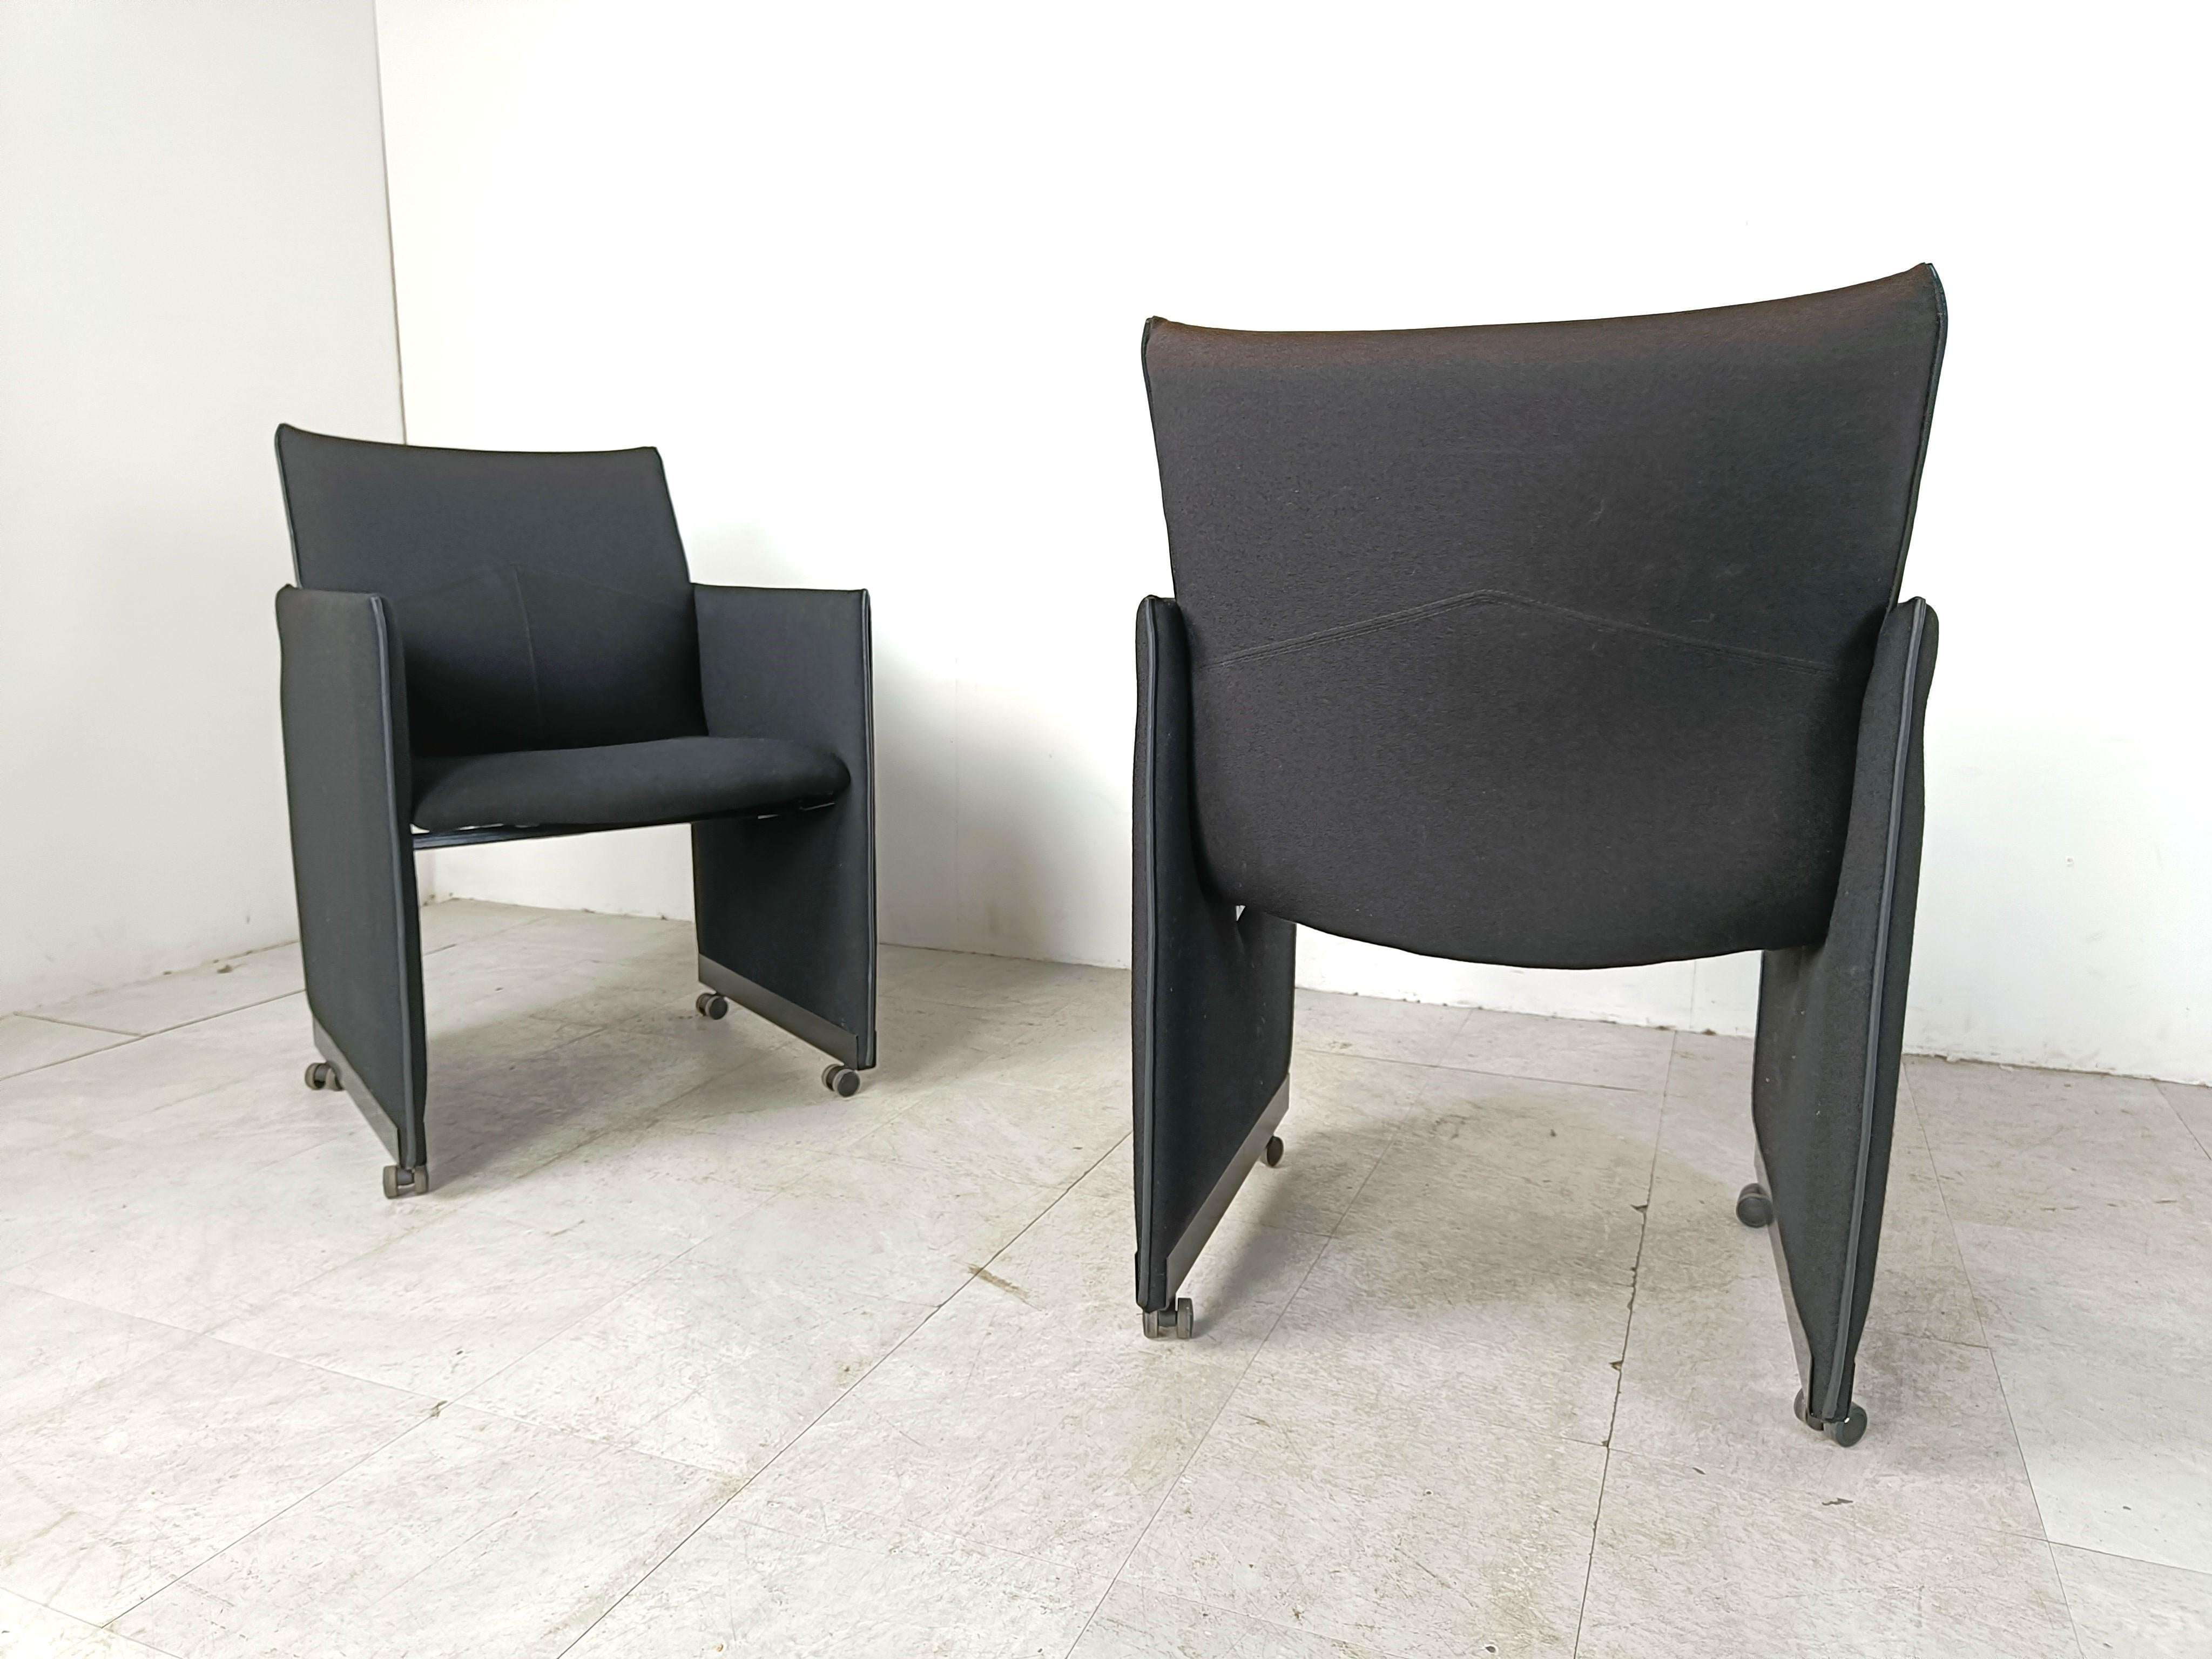 Montana armchairs by Geoffrey Harcourt for Artifort, 1990s - set of 4 For Sale 3